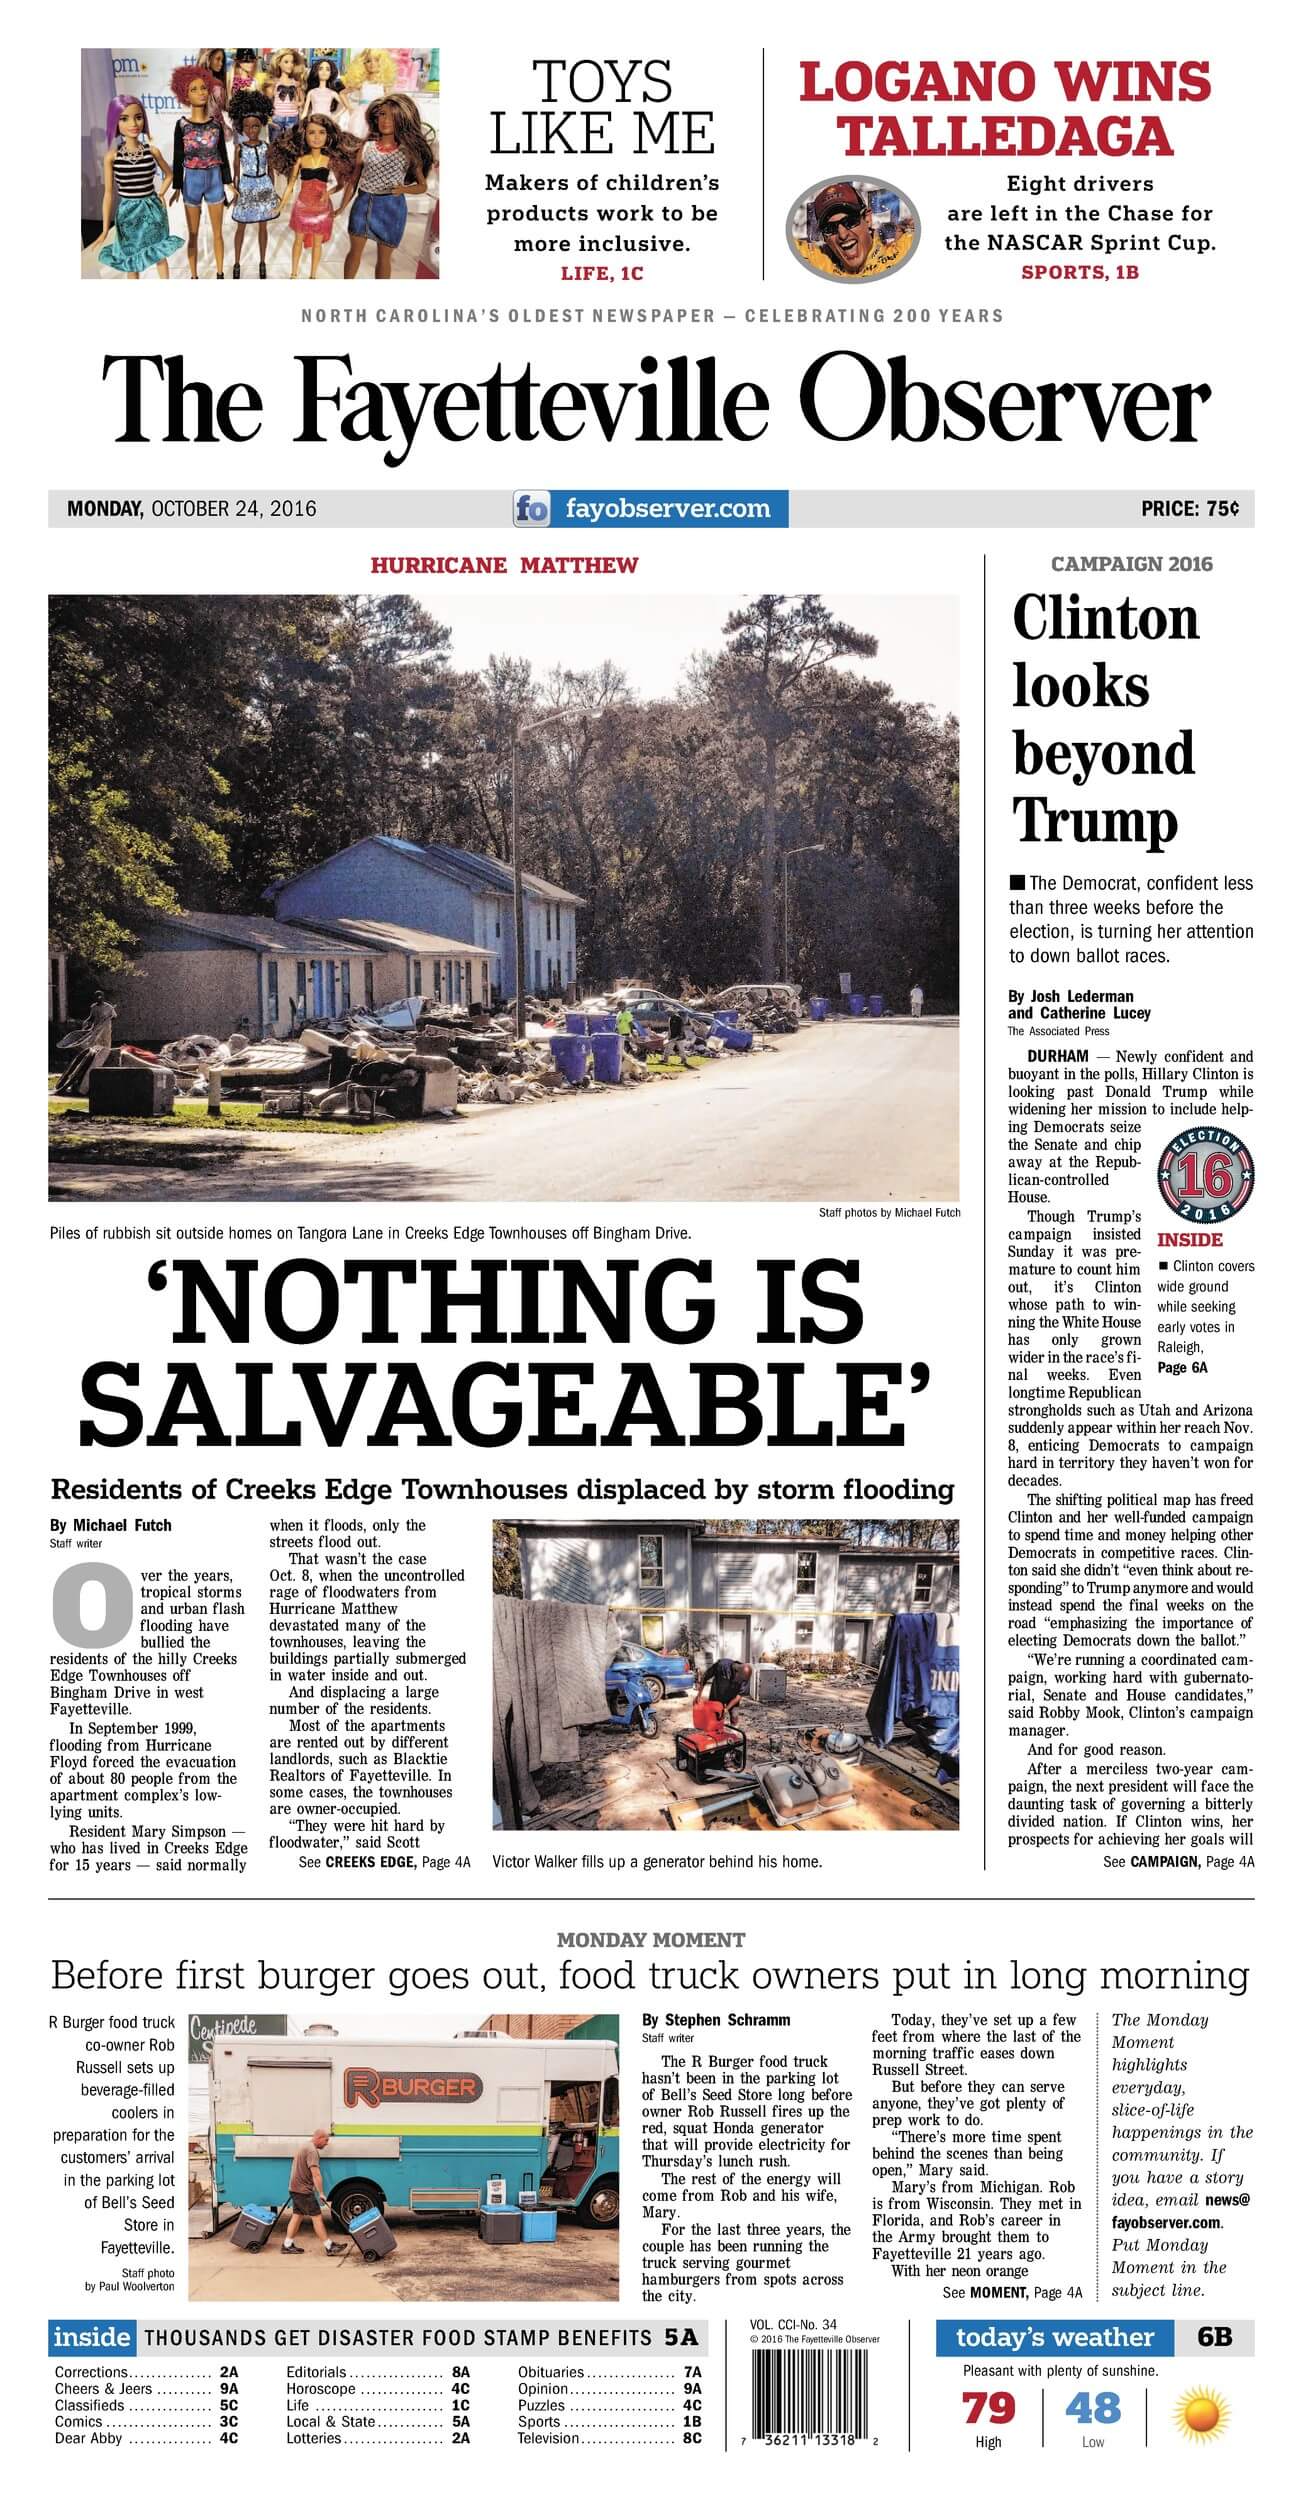 North Carolina newspapers 15 The Fayetteville Observer